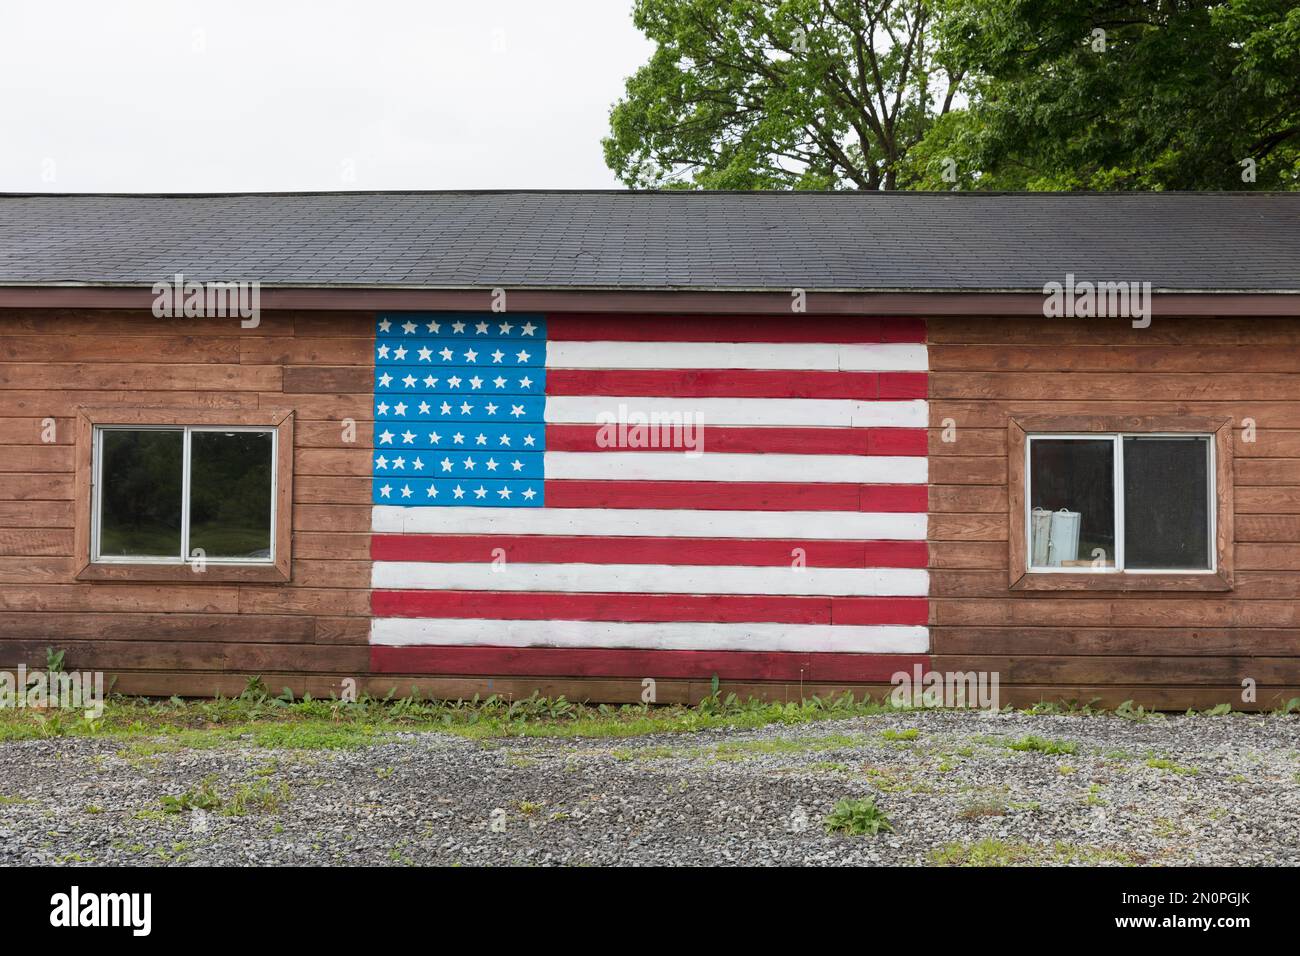 An American flag painted on empty building on a street in a small town. Stock Photo